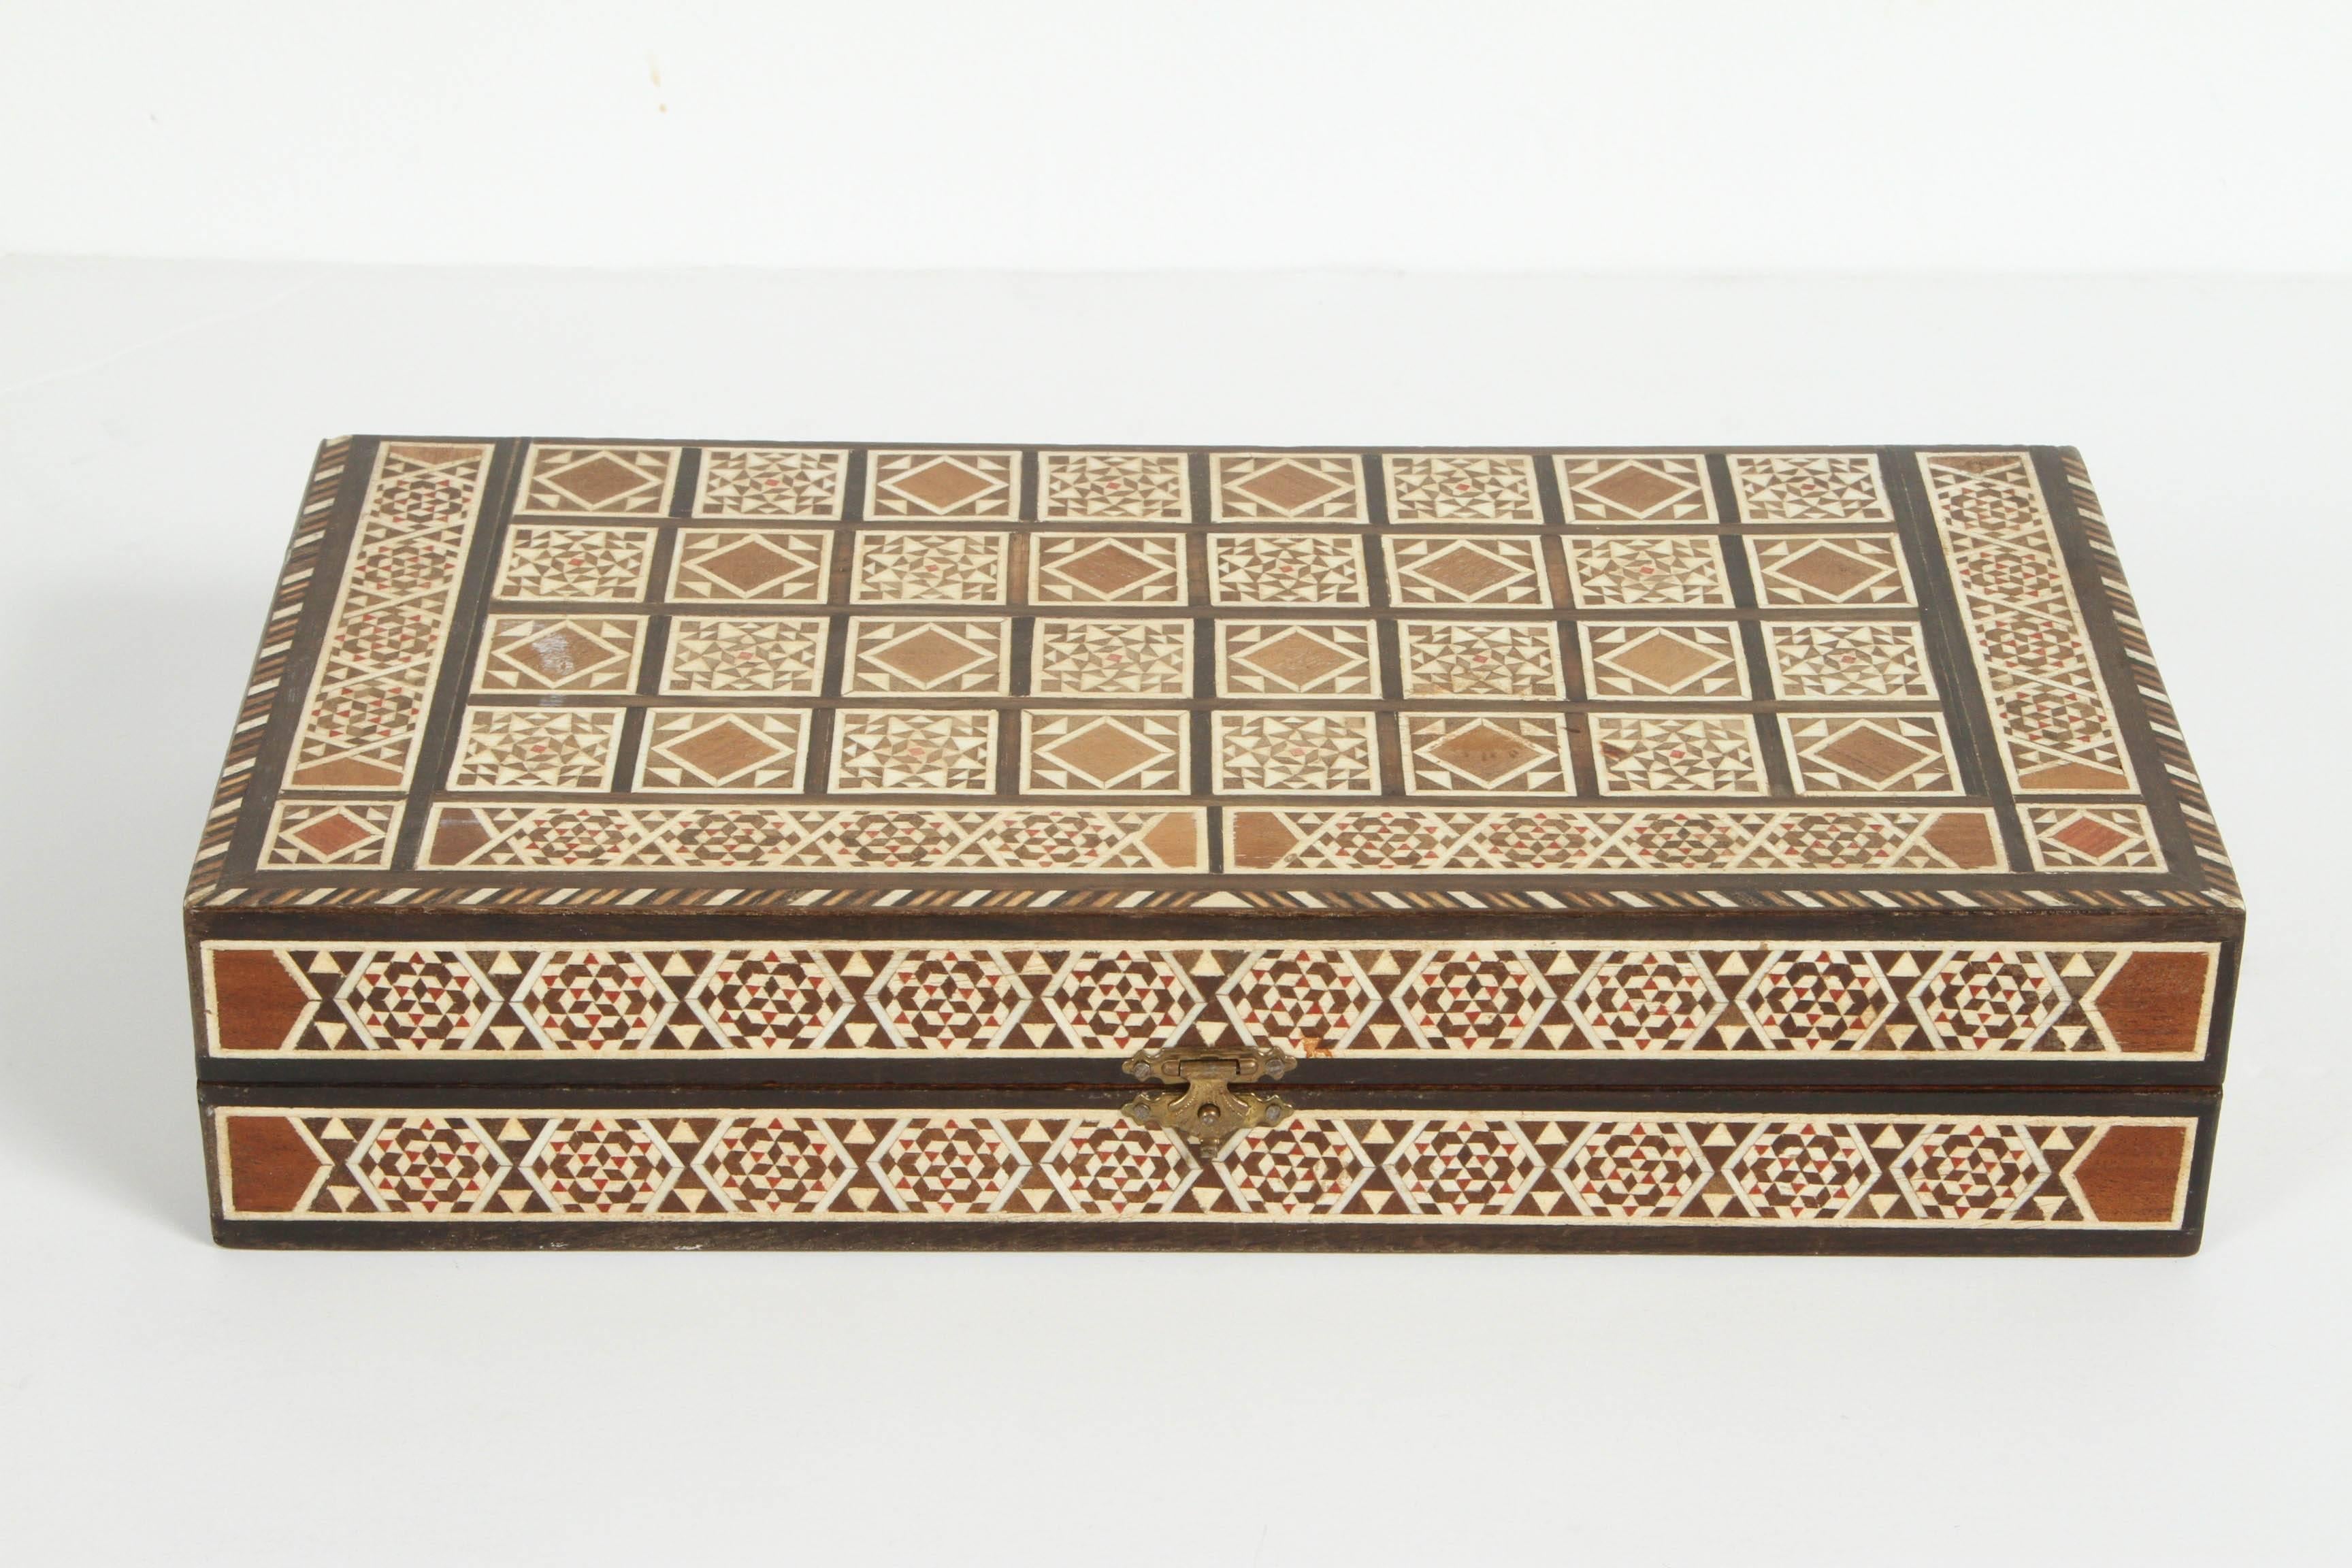 Syrian inlaid mosaic backgammon game.
Great hand-crafted Middle Eastern inlaid micro mosaic box with backgammon game with all dice and pieces.
Size: Closed: 12